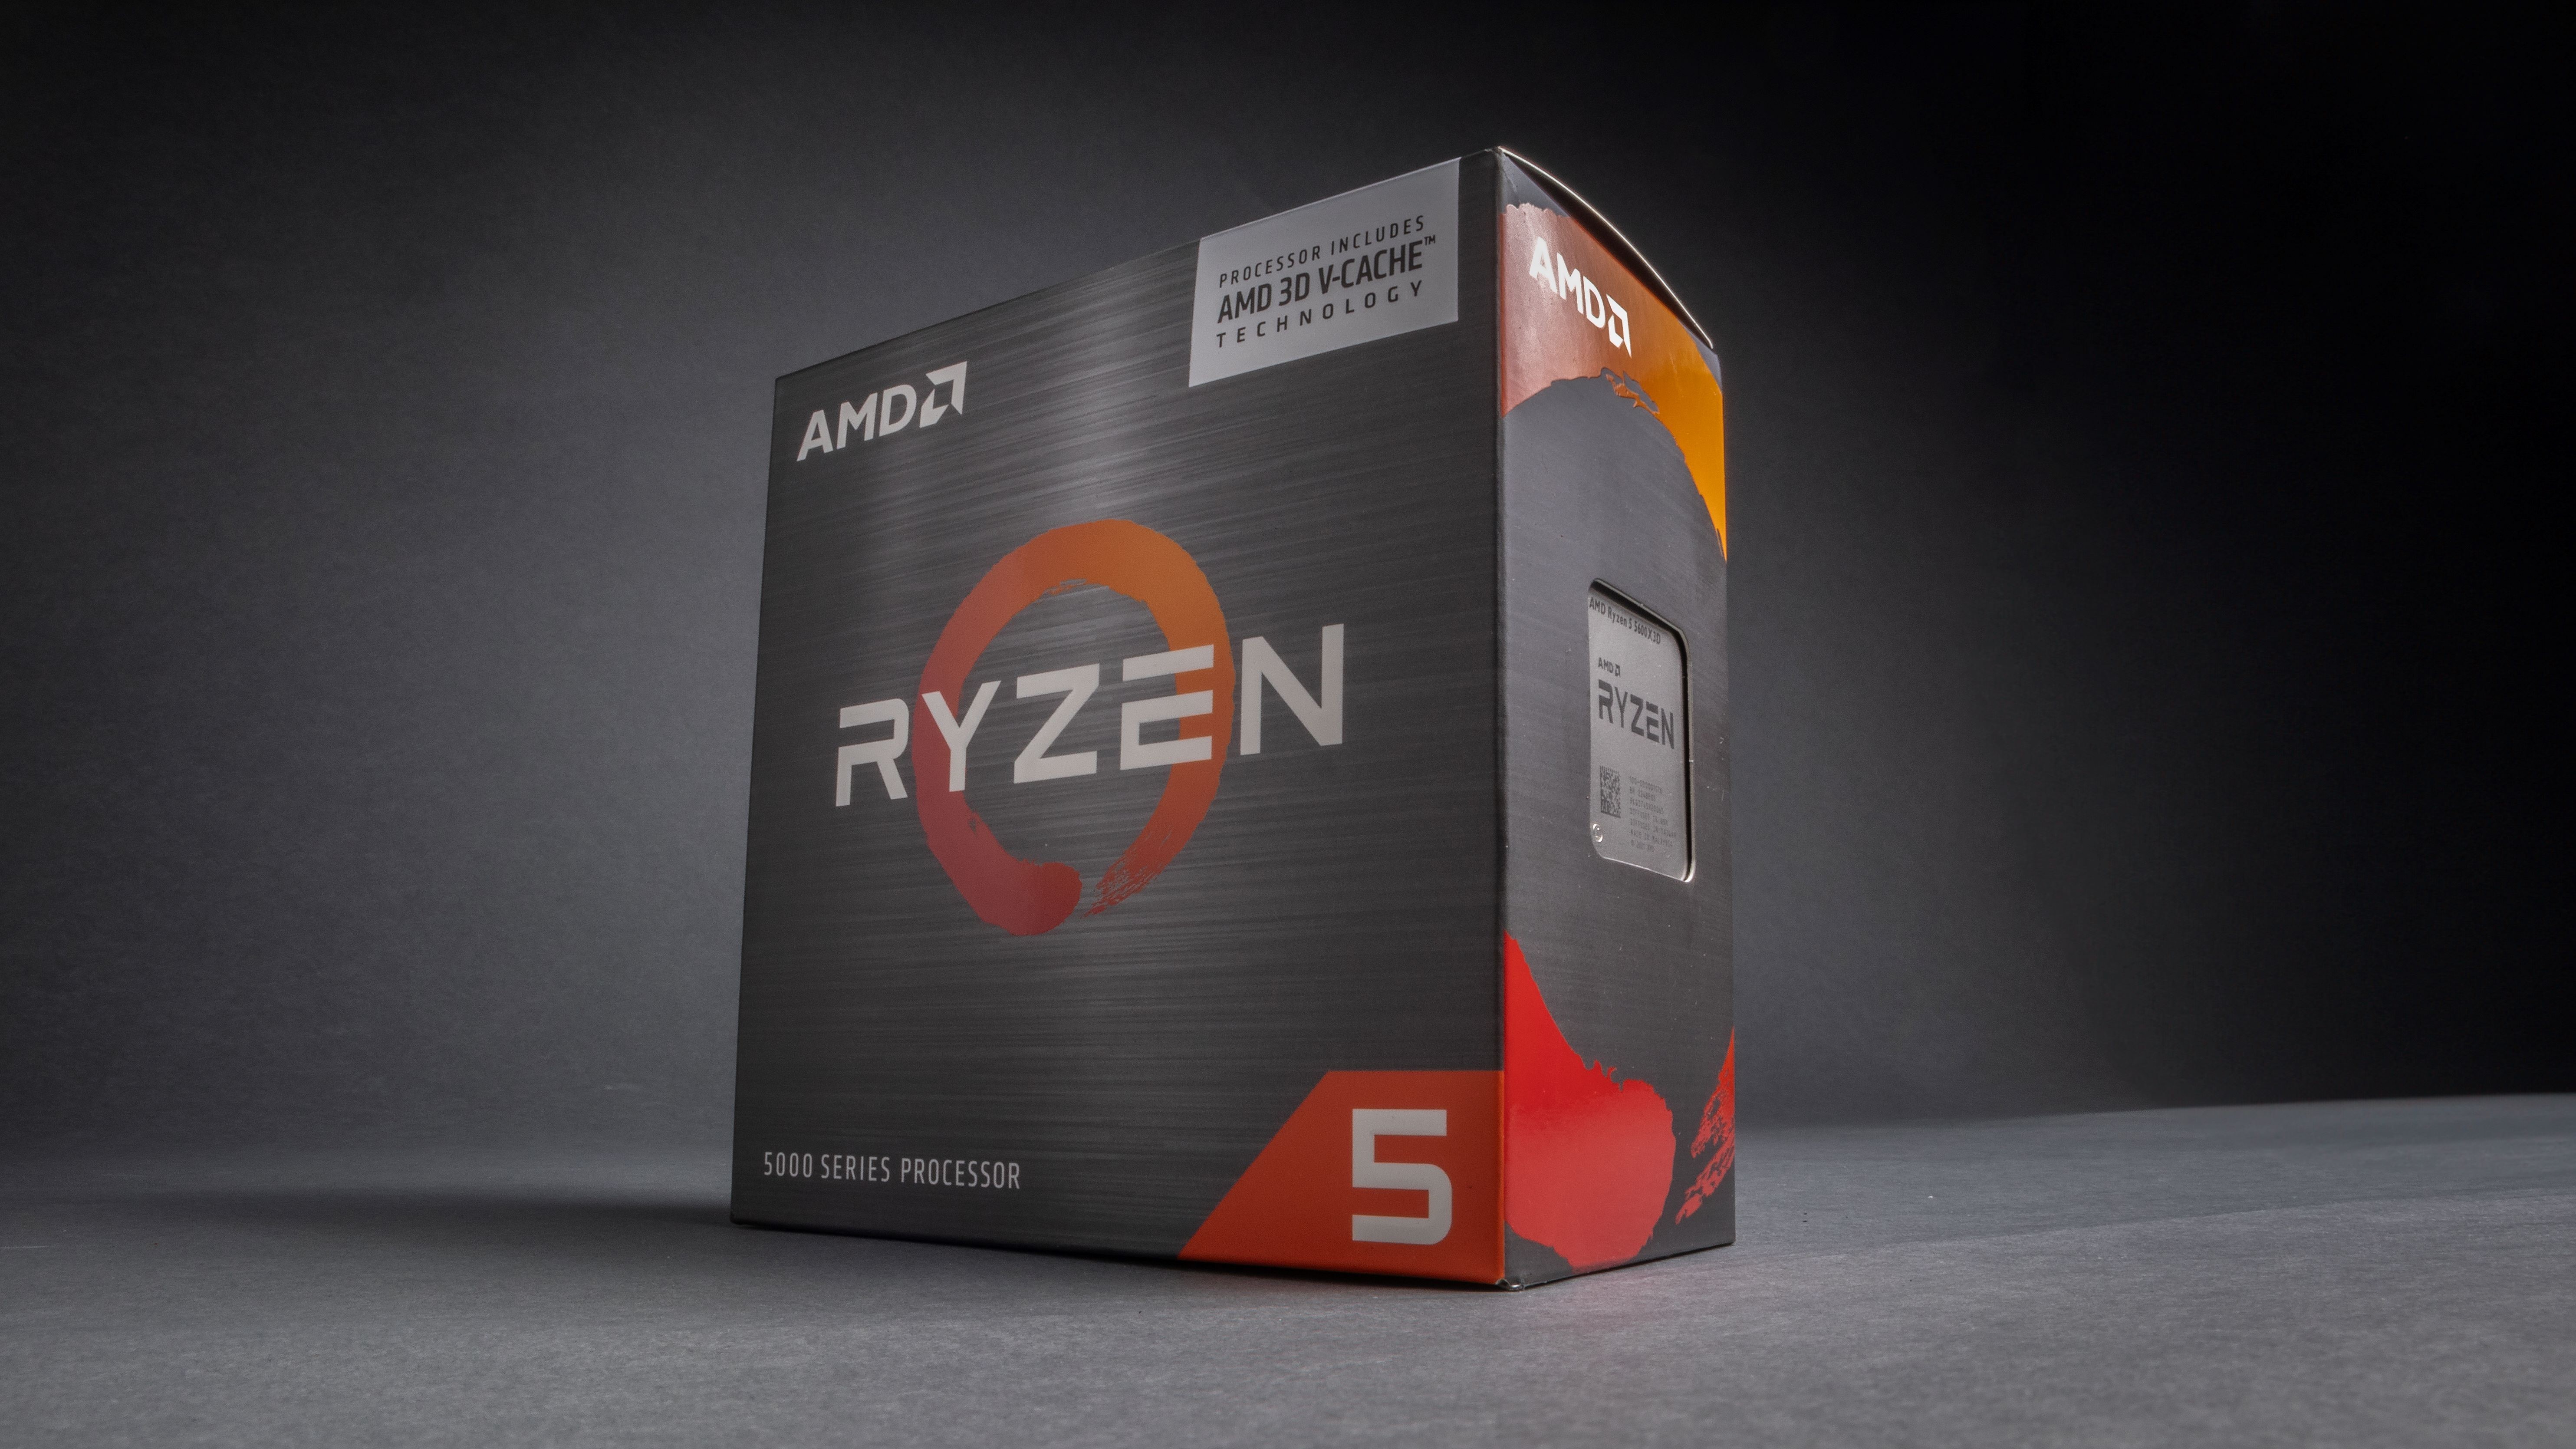 AMD Ryzen 5 5600X3D to Launch July 7th for $229 at Micro Center